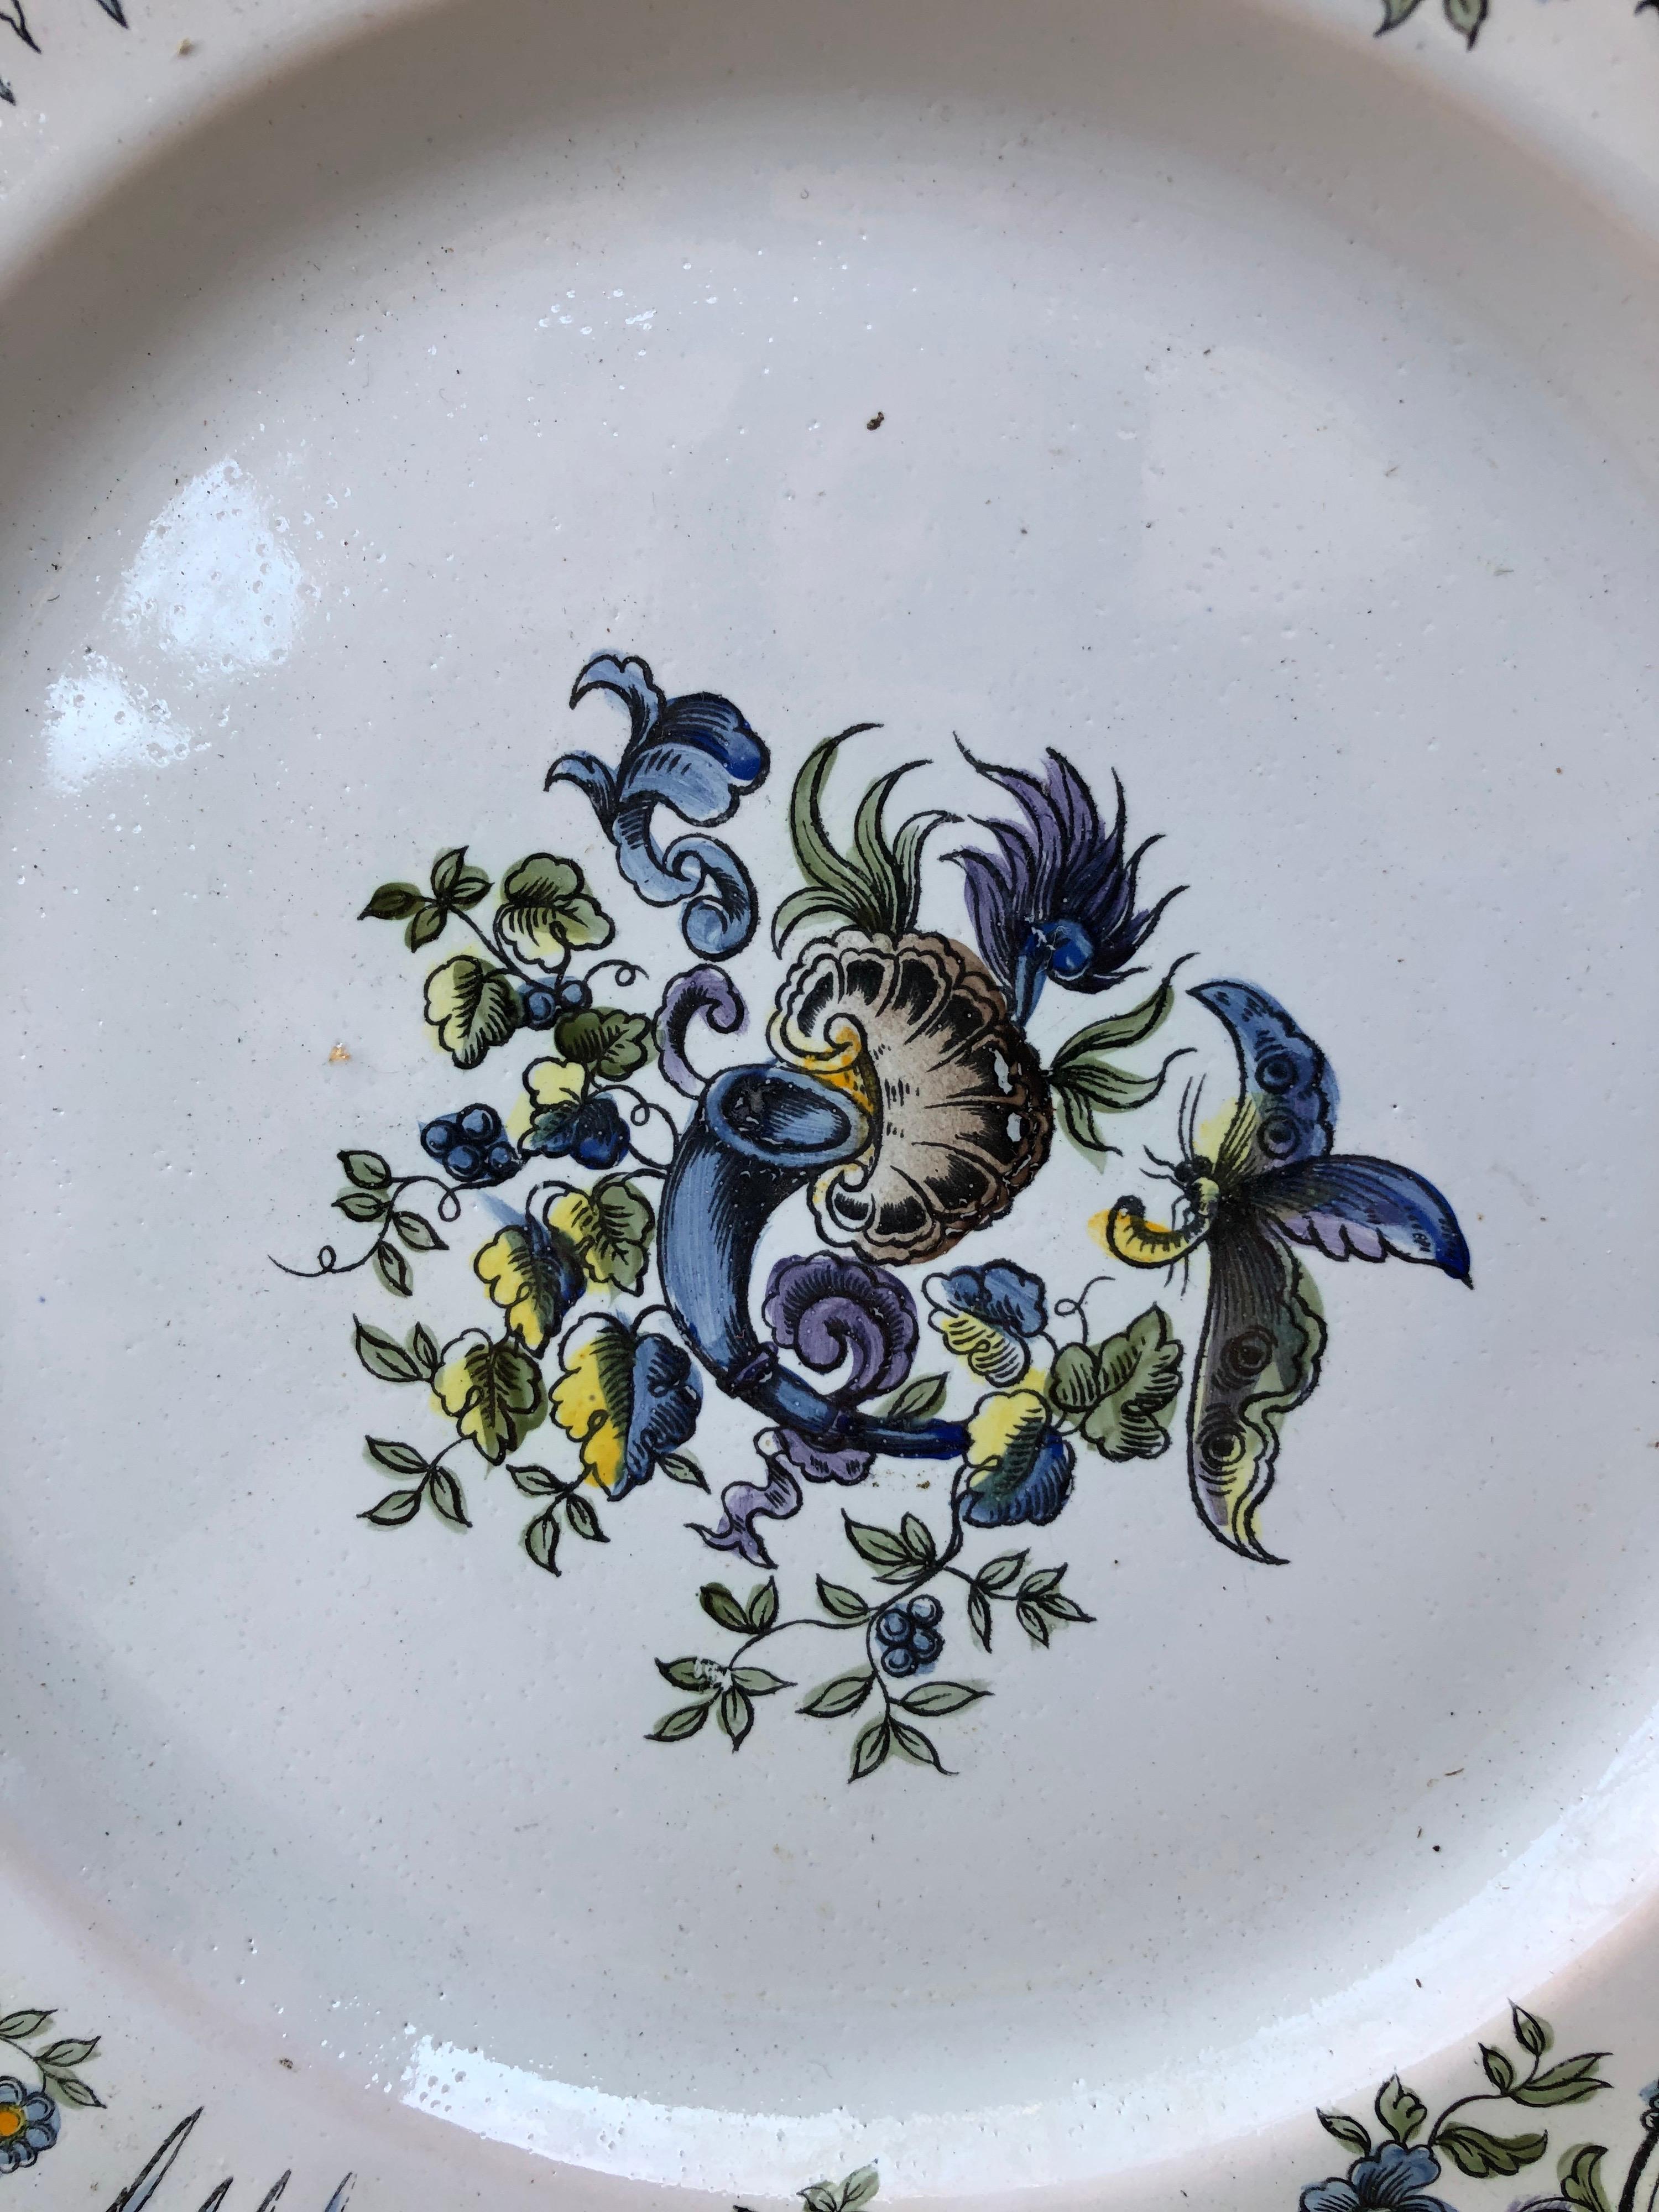 French Faience plate signed Emile Galle Saint Clement Circa 1900.
Decorated with cornucopia and flowers, butterfly.